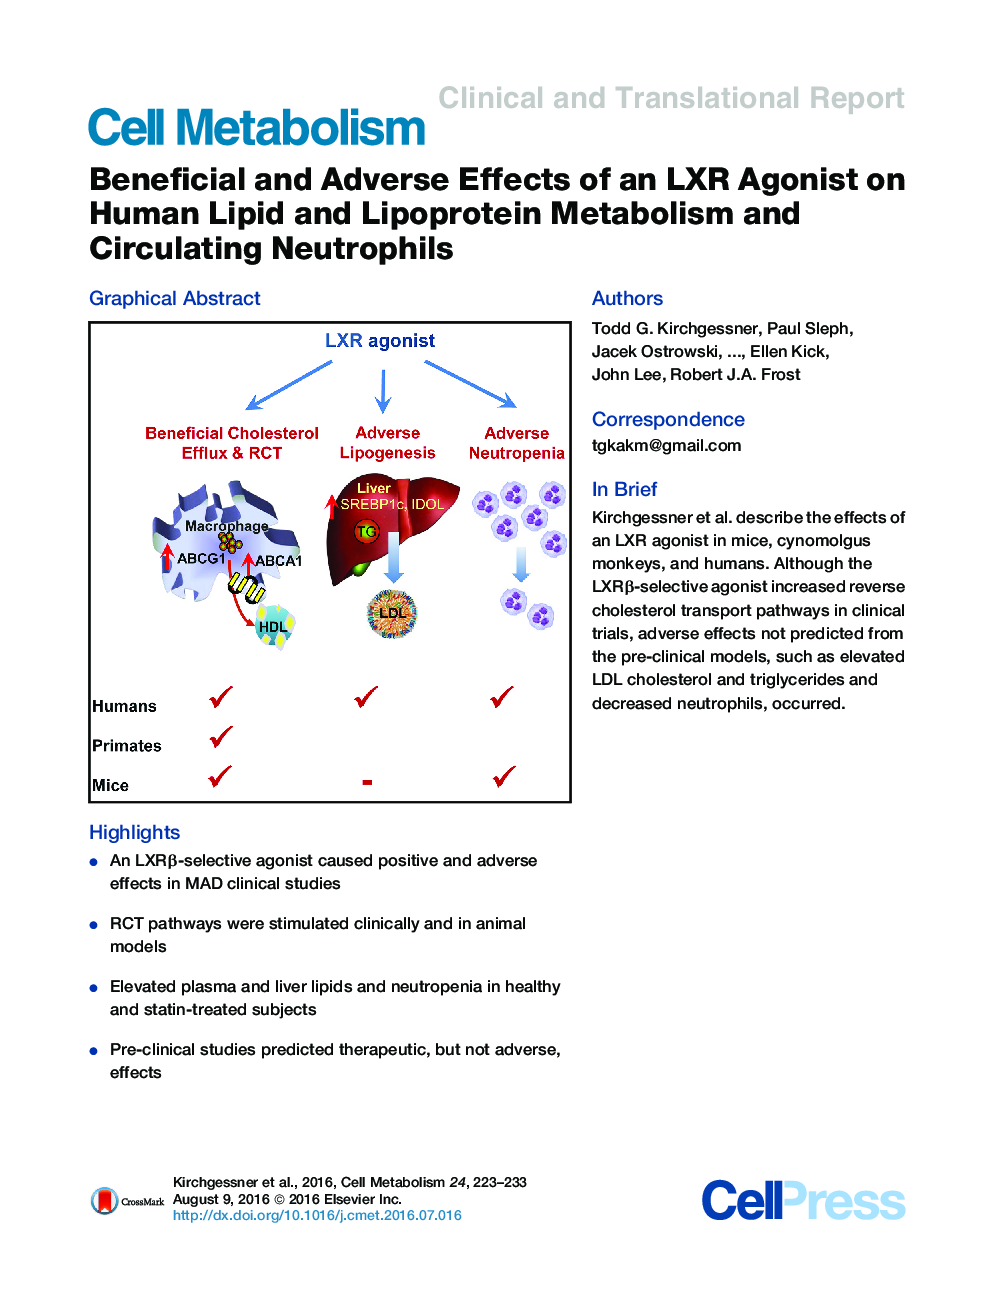 Beneficial and Adverse Effects of an LXR Agonist on Human Lipid and Lipoprotein Metabolism and Circulating Neutrophils